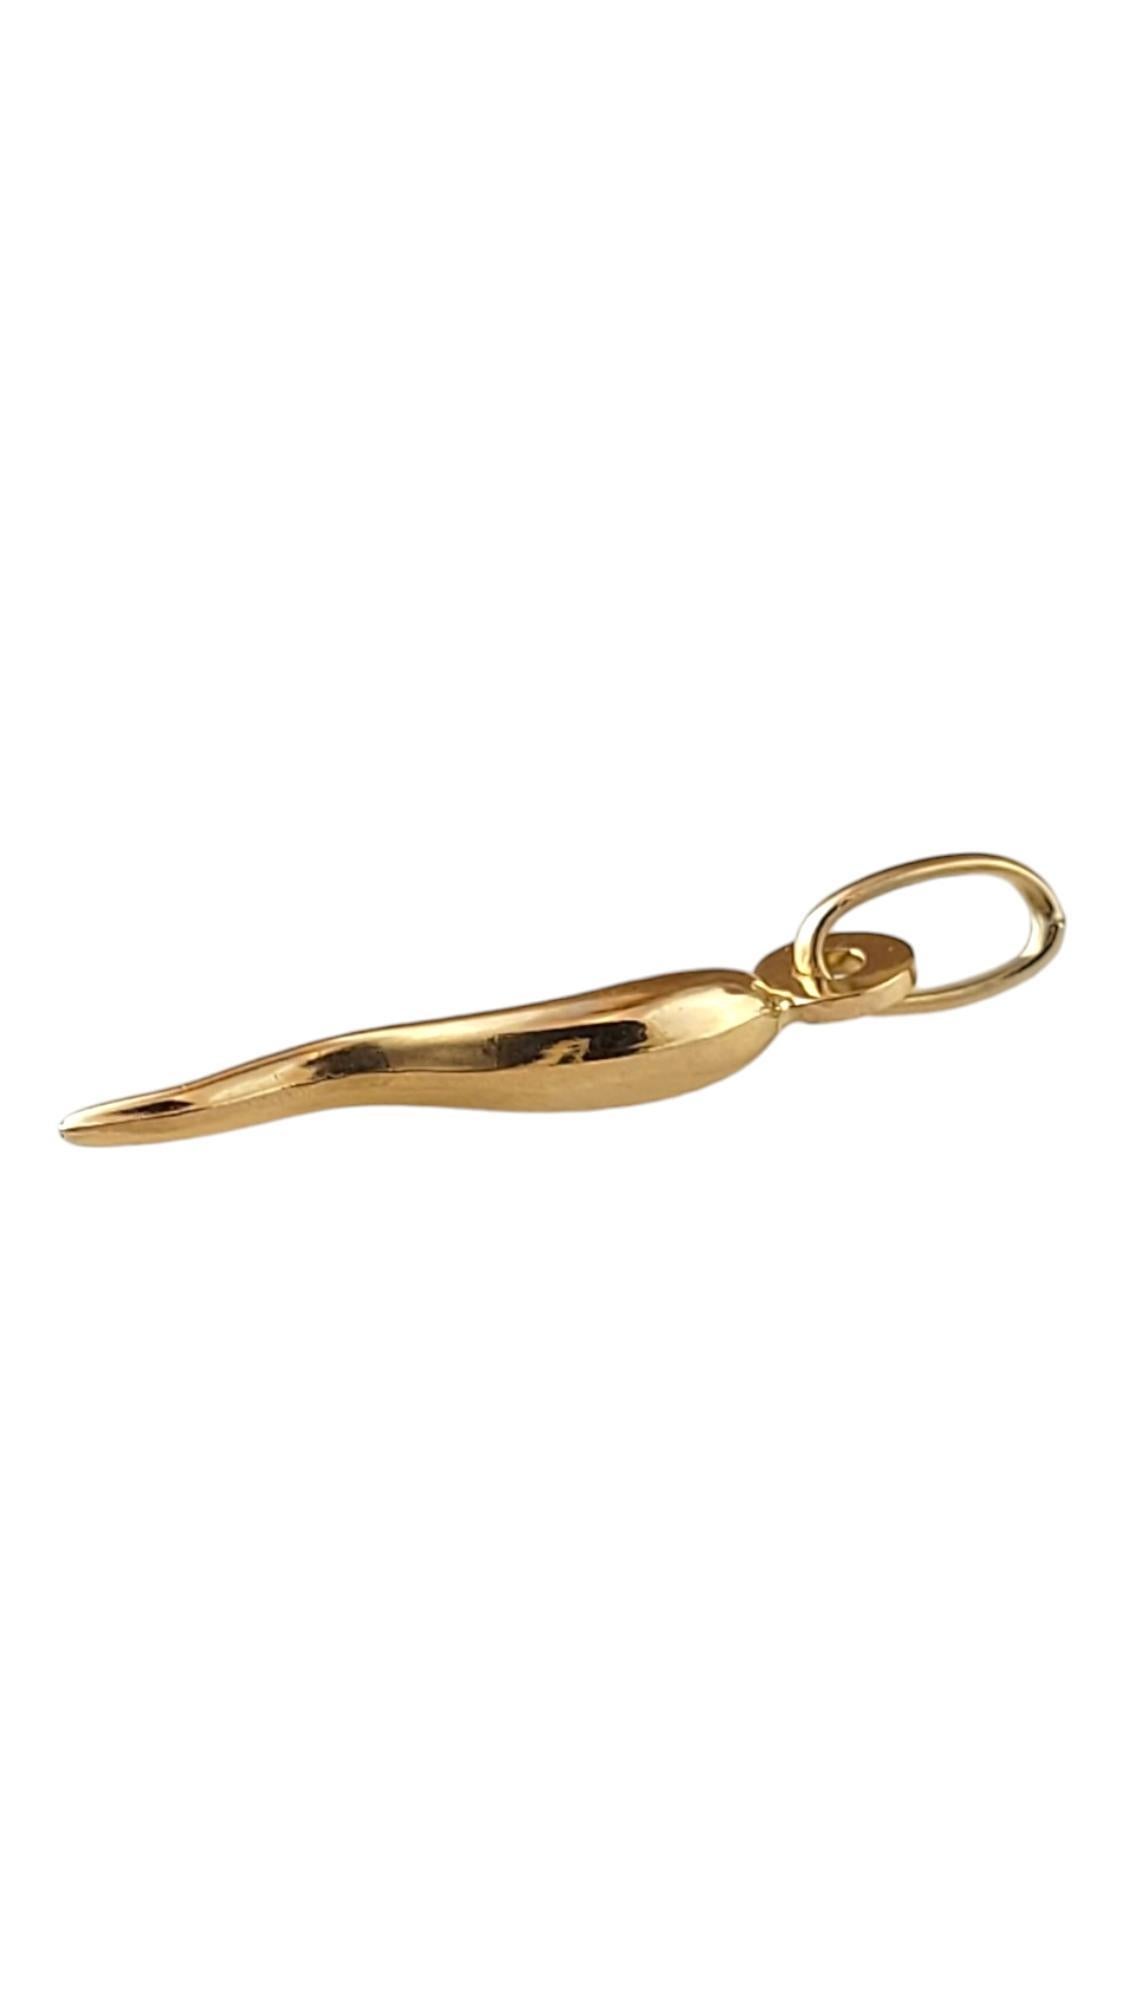 18K Yellow Gold Italian Horn Pendant

This beautiful Italian horn pendant was crafted from 18K yellow gold and would be perfect on a necklace or bracelet!

Size: 20.0mm X 3.4mm X 3.0mm

Weight: 0.3 dwt/ 0.5 g

Hallmark: 750

Very good condition,